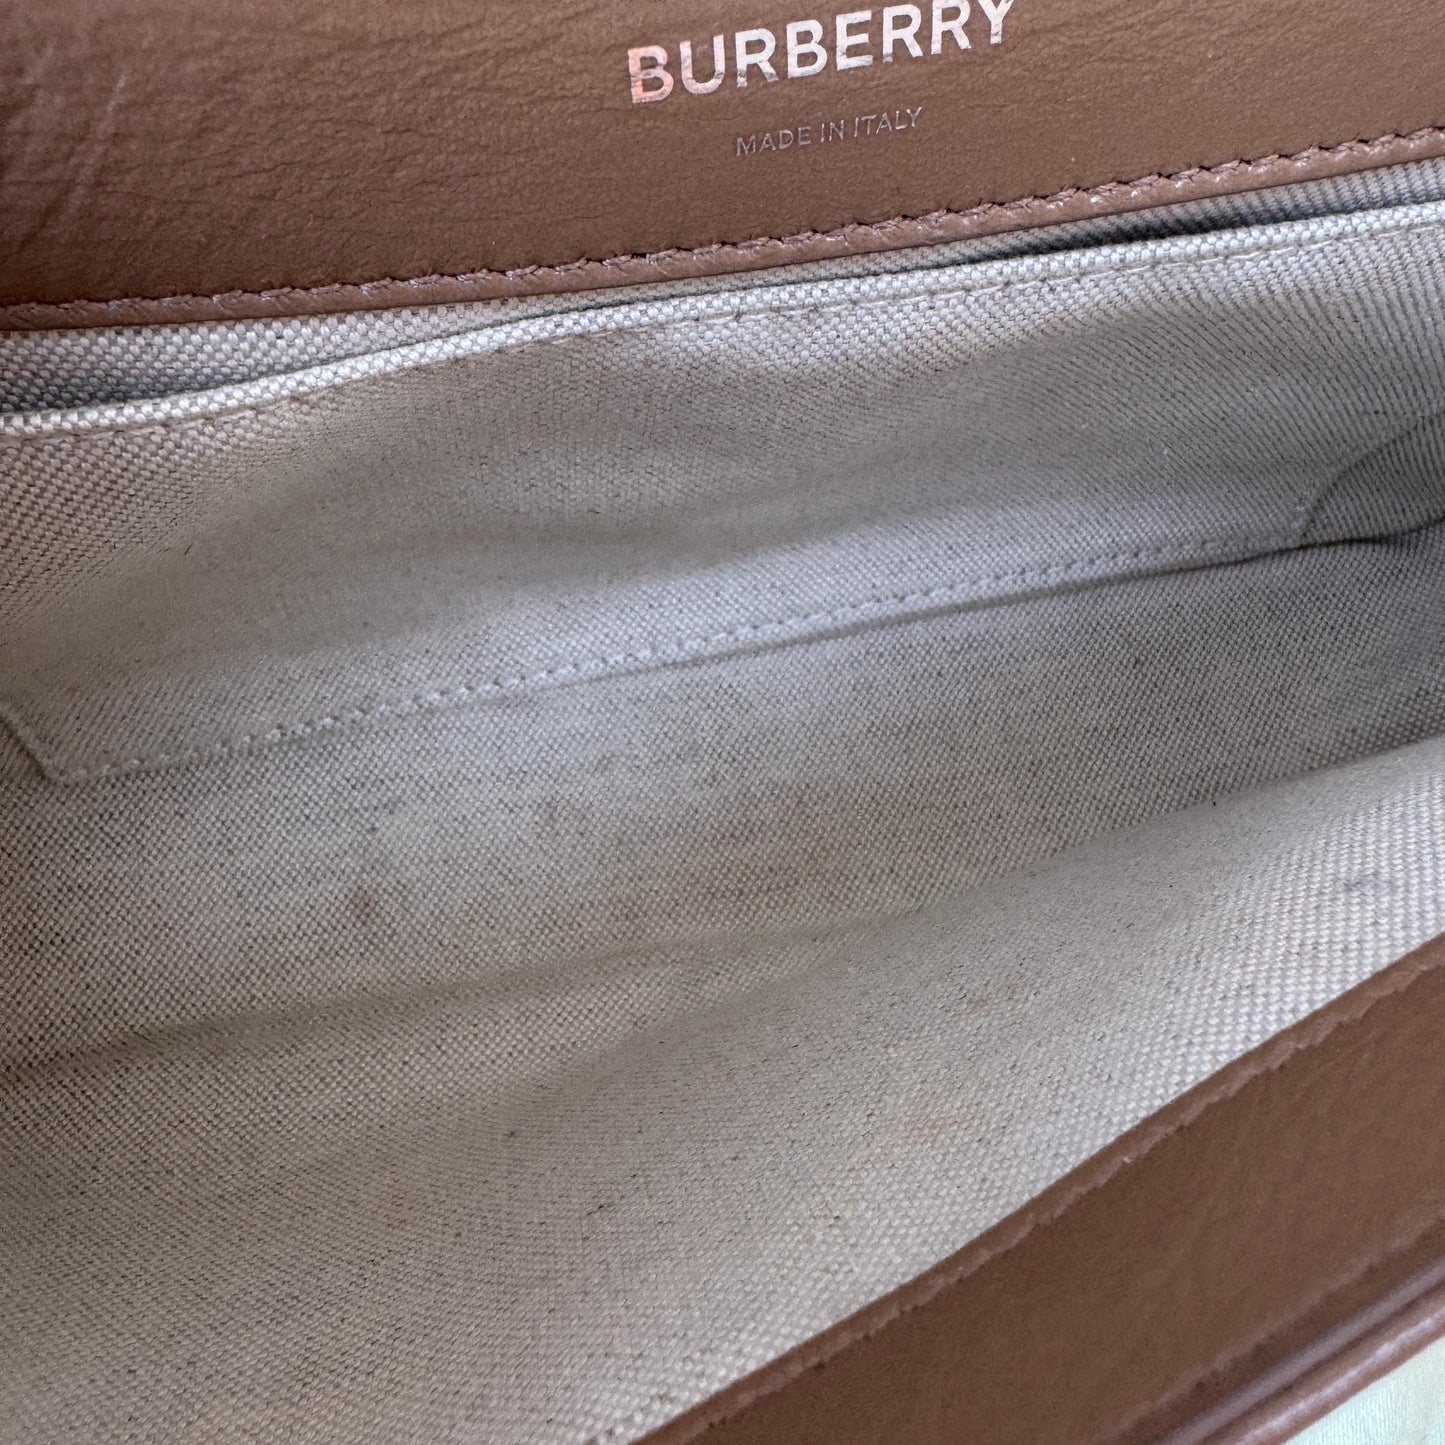 Burberry Lola Small Patent Leather Resin Shoulder Bag